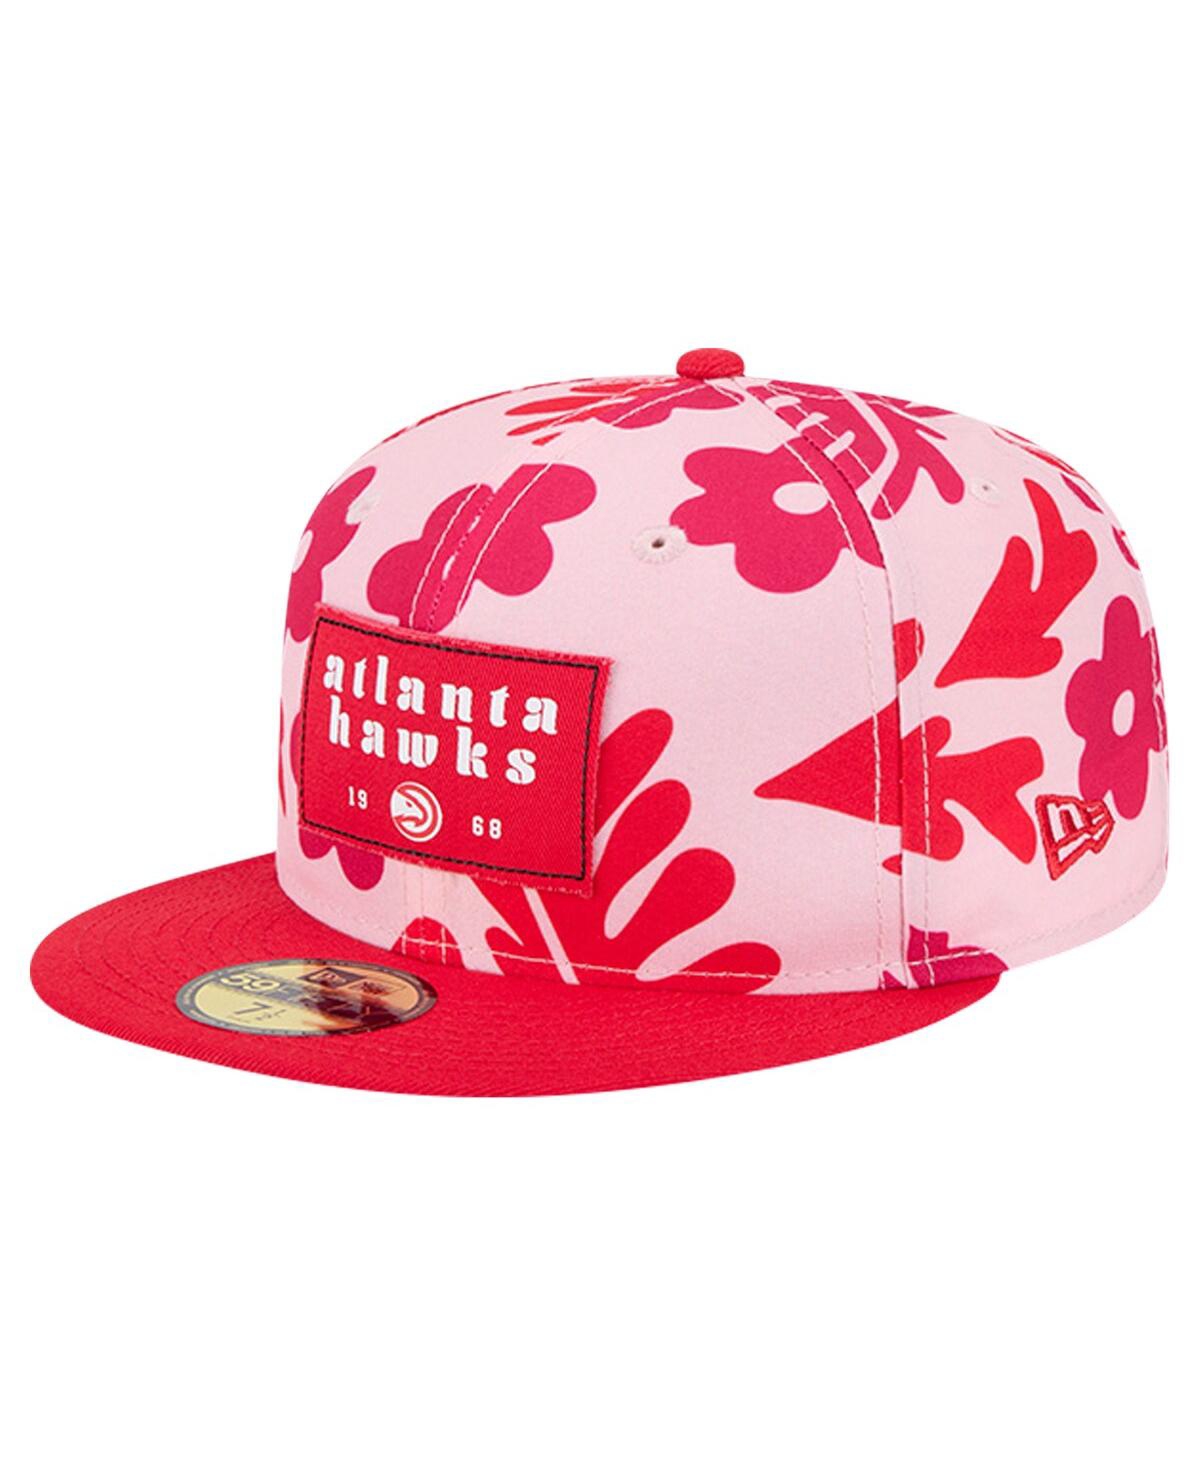 Men's Red Atlanta Hawks Palm Fronds 2-Tone 59FIFTY Fitted Hat - Red